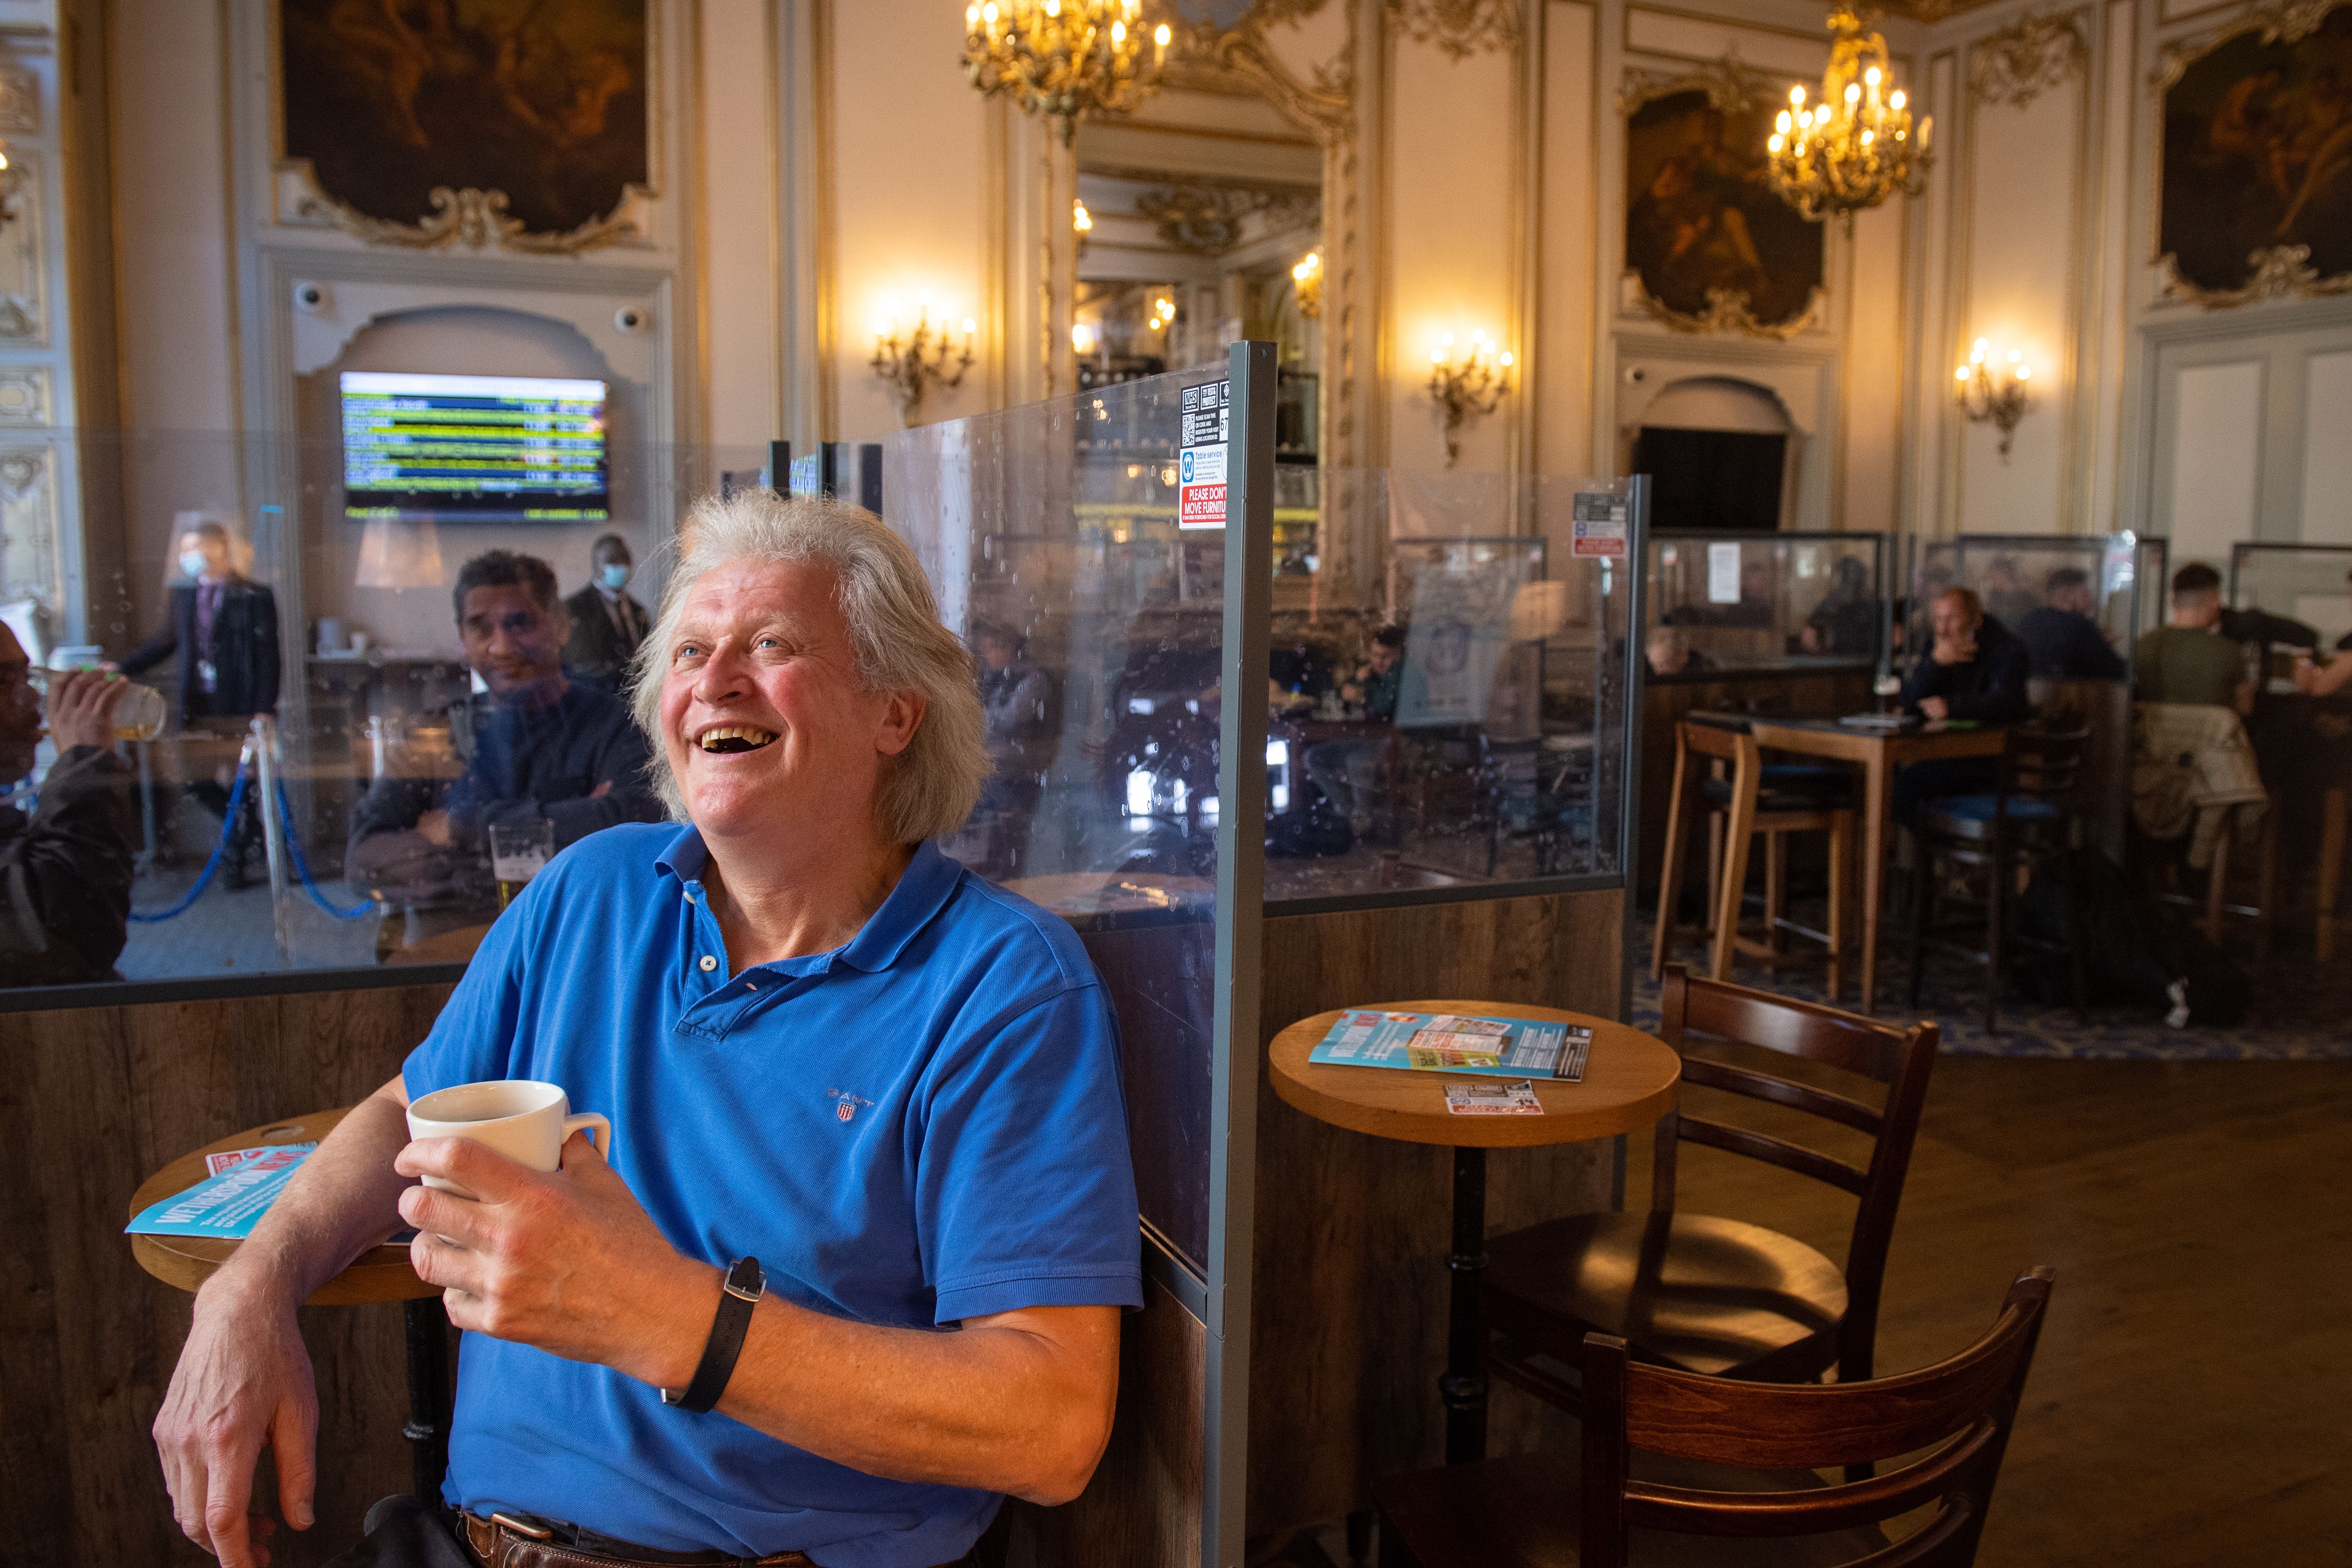 Wetherspoon founder and chairman Tim Martin said the firm expects annual profits to be ‘towards the top of market expectations’